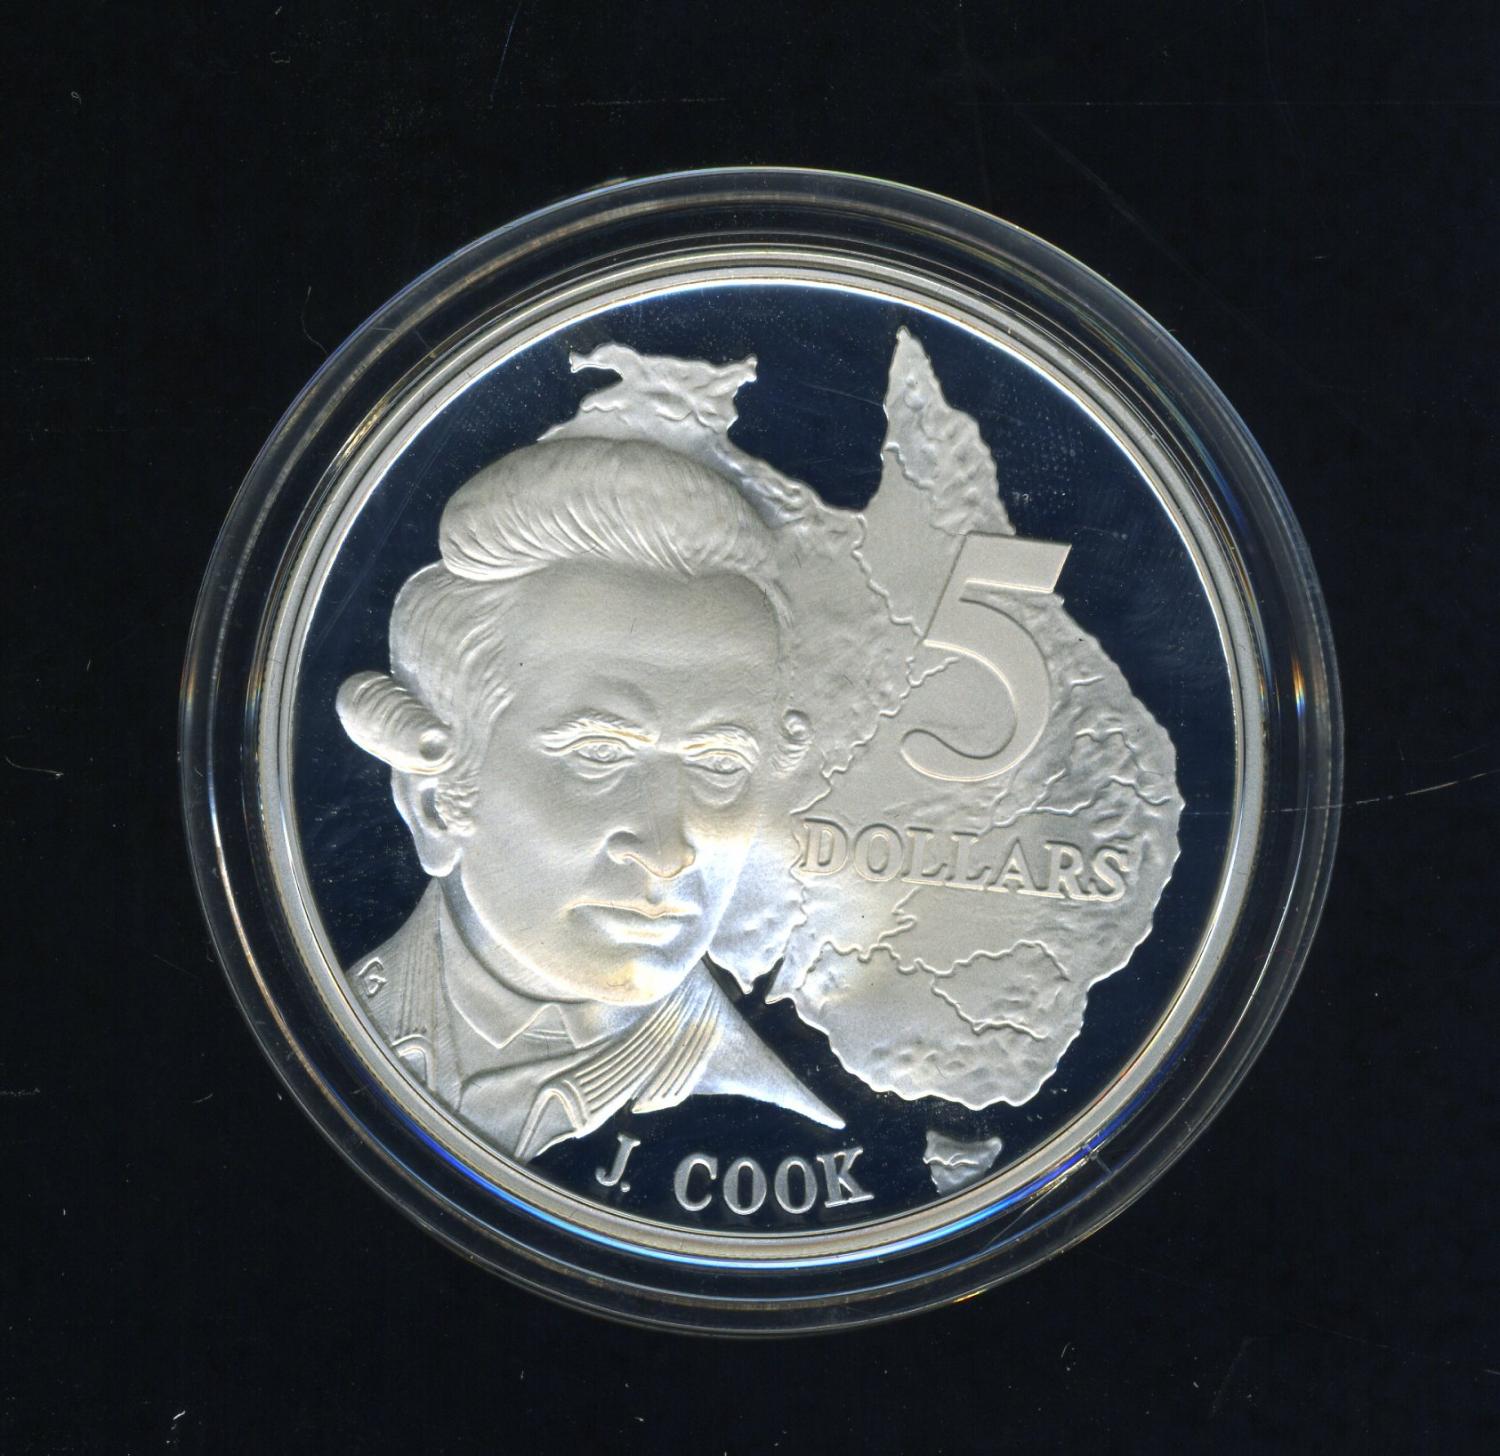 Thumbnail for 1993 Australian $5 Silver Coin from Masterpieces in Silver Set - James Cook.  The Coin is Sterling Silver and contains over 1oz of Pure Silver.